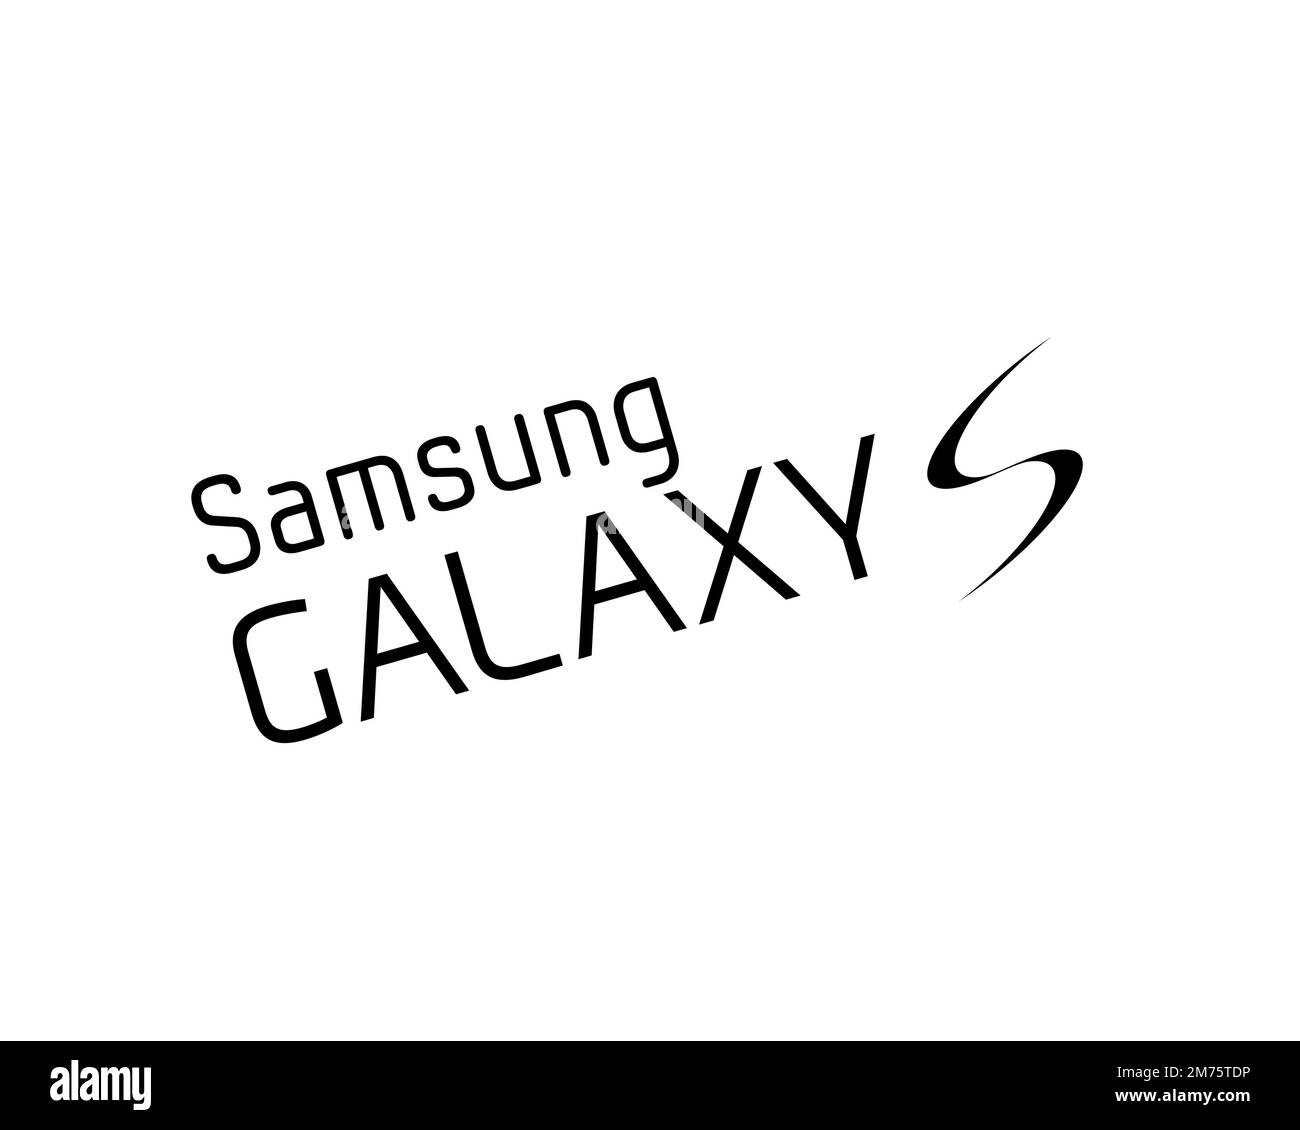 Samsung logos vector in (SVG, EPS, AI, CDR, PDF) free download